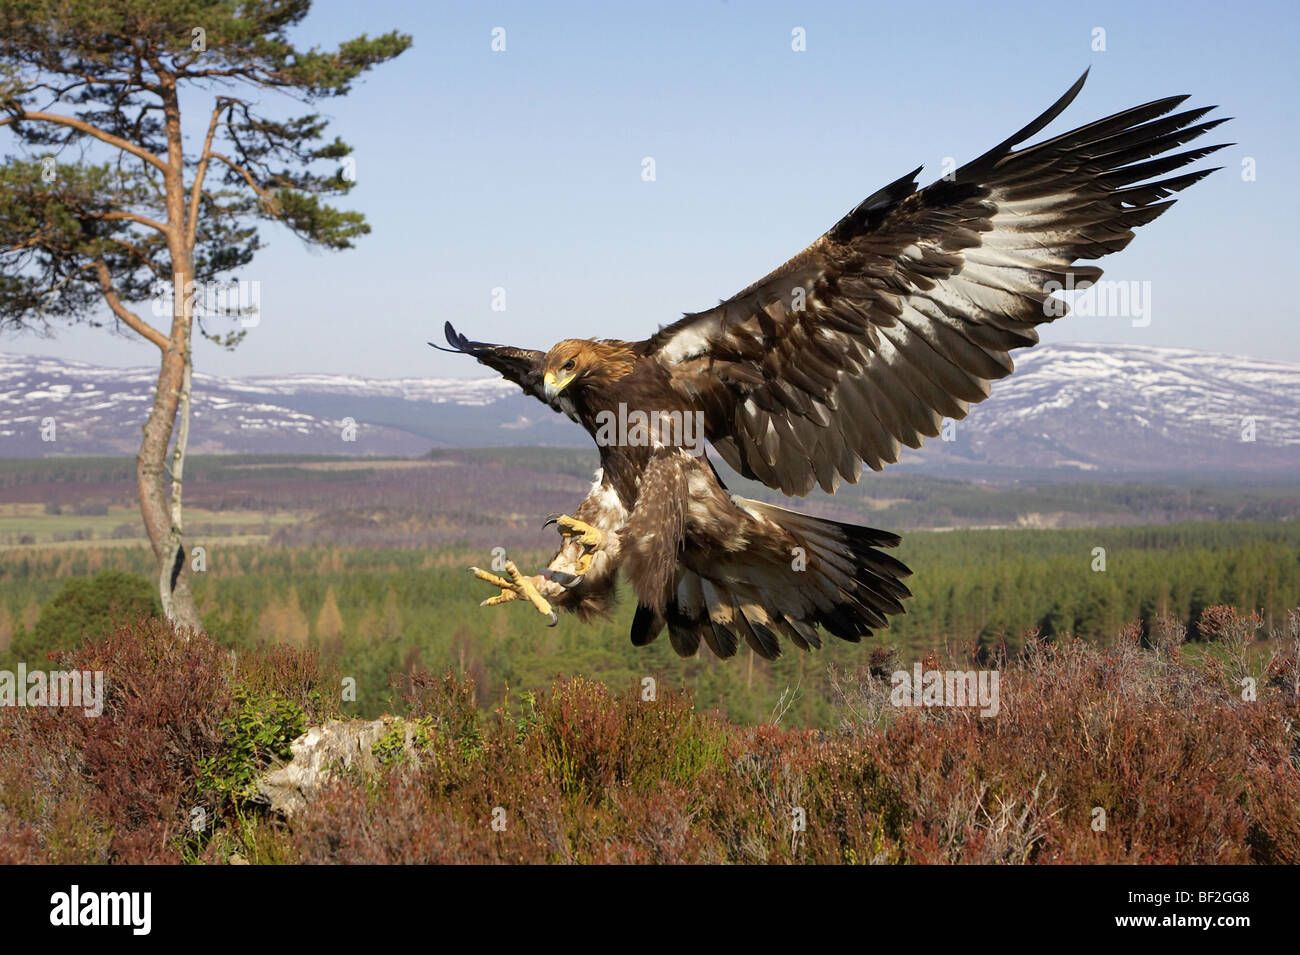 Golden Eagle (Aquila chrysaetos), in flight in mountain habitat preparing to land on stump (taken in controlled conditions). Stock Photo